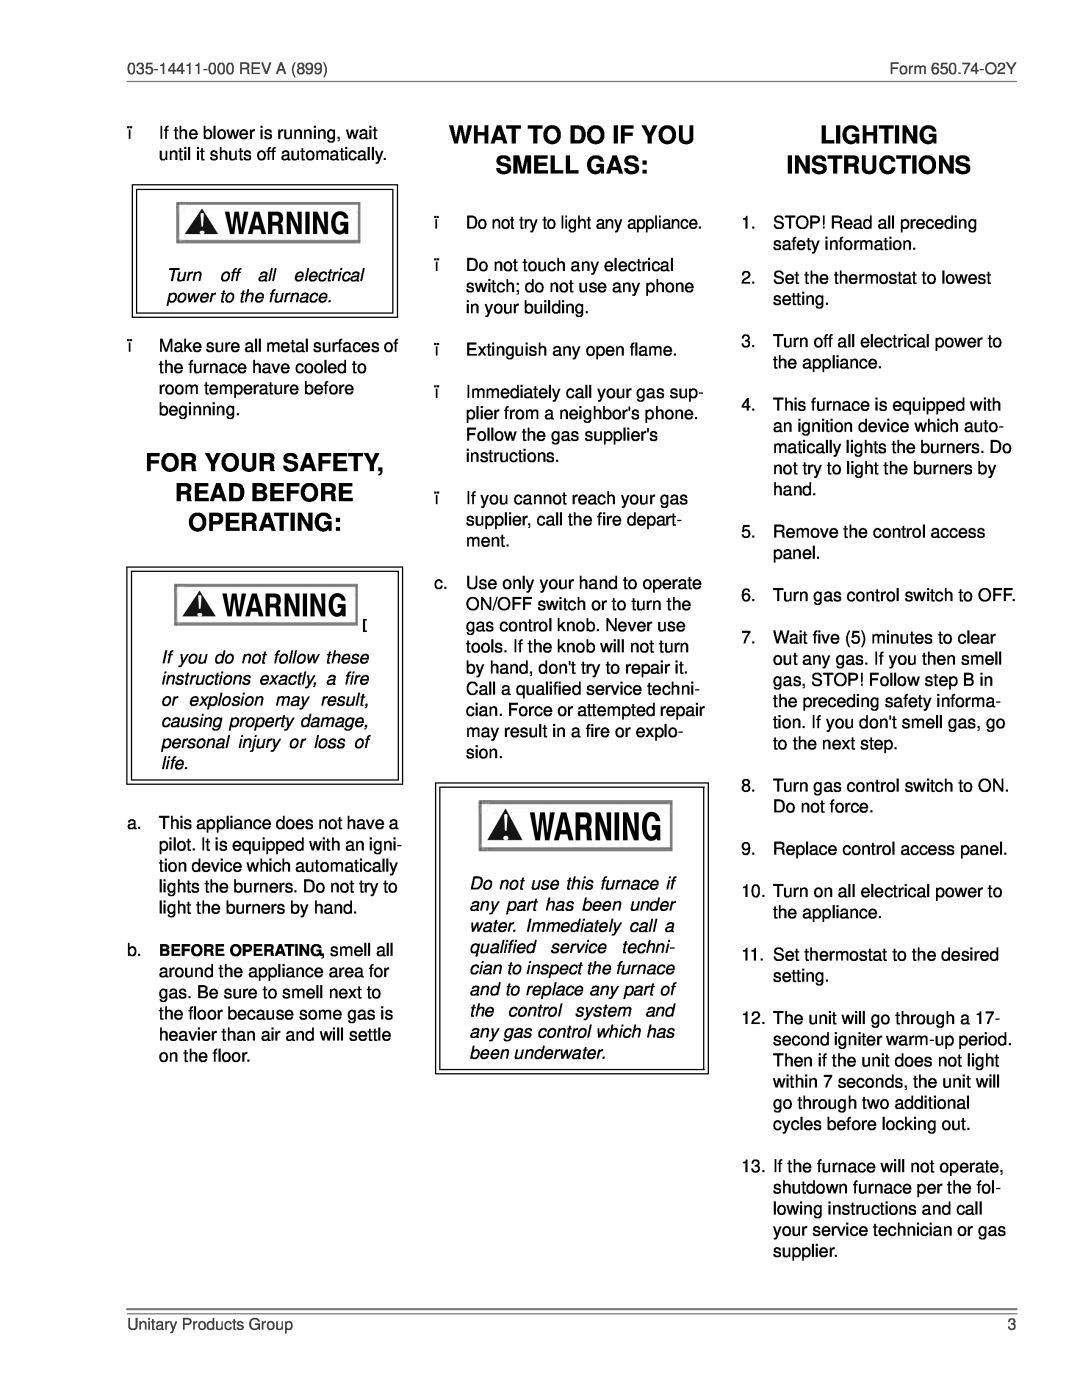 White Rodgers 80 owner manual For Your Safety Read Before Operating, What To Do If You Smell Gas, Lighting Instructions 